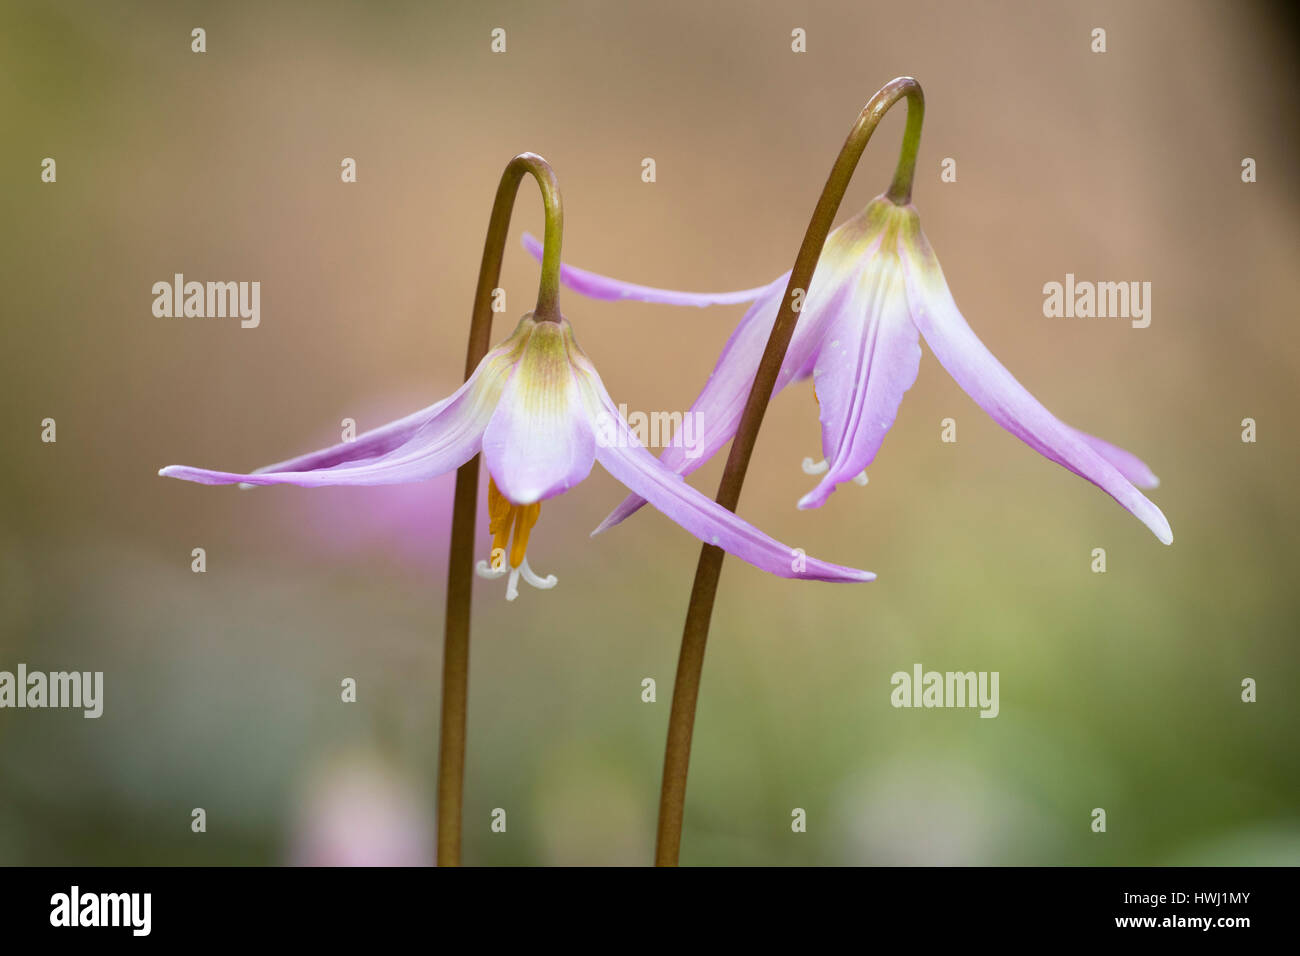 Two flowers of the selected 'Johnsonii Group' seedling strain of the pink trout lily, Erythronium revolutum Stock Photo